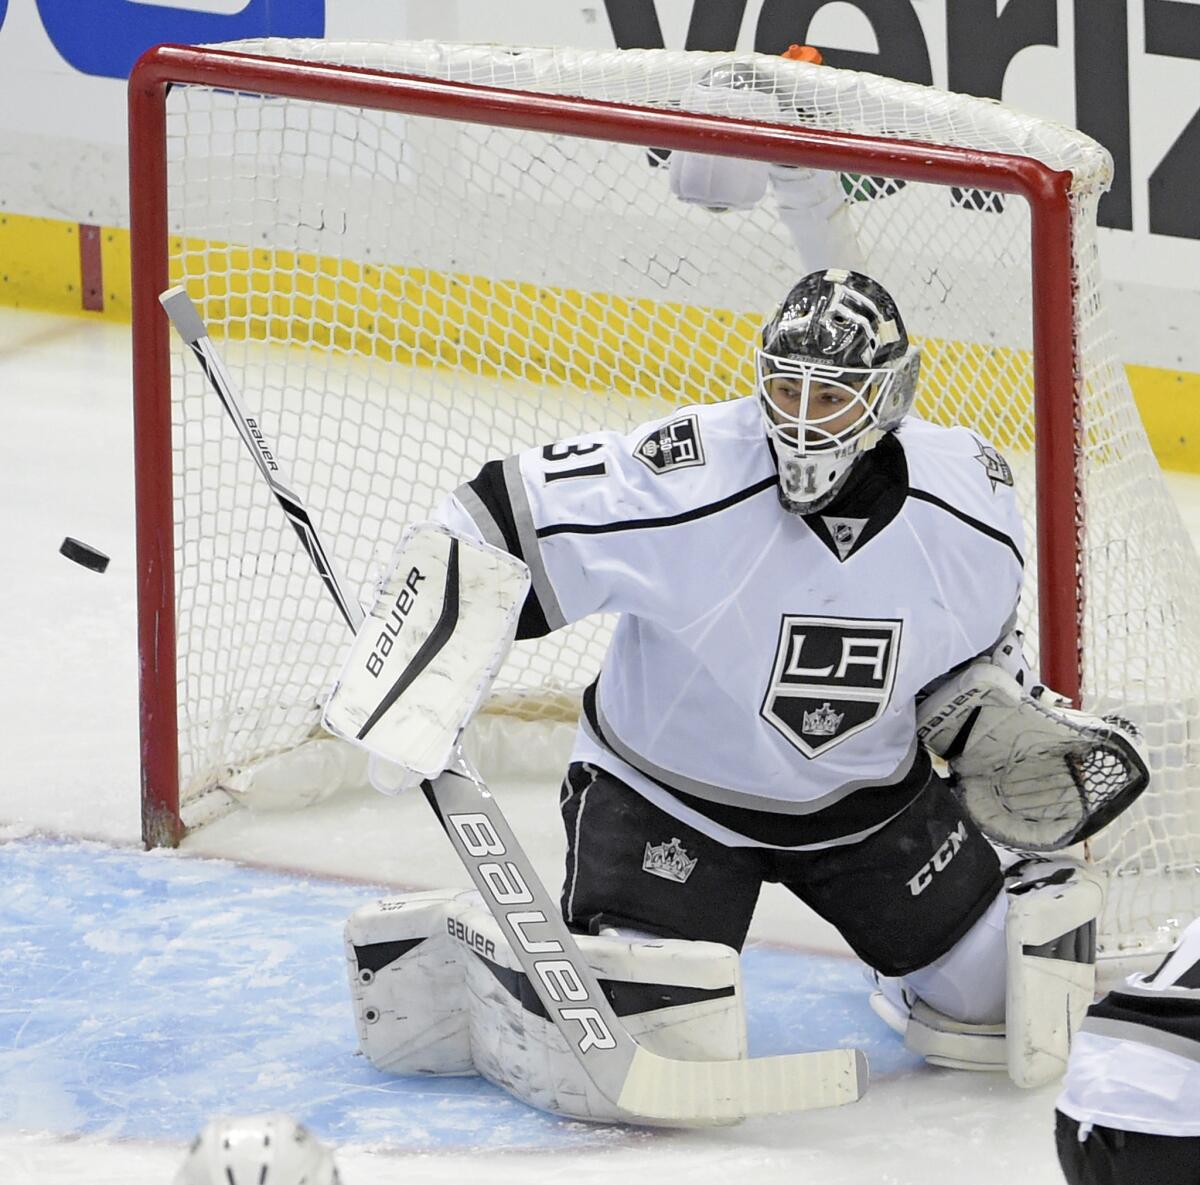 Kings goalie Peter Budaj (31) makes a save during the first period against the Pittsburgh Penguins on Dec. 16.